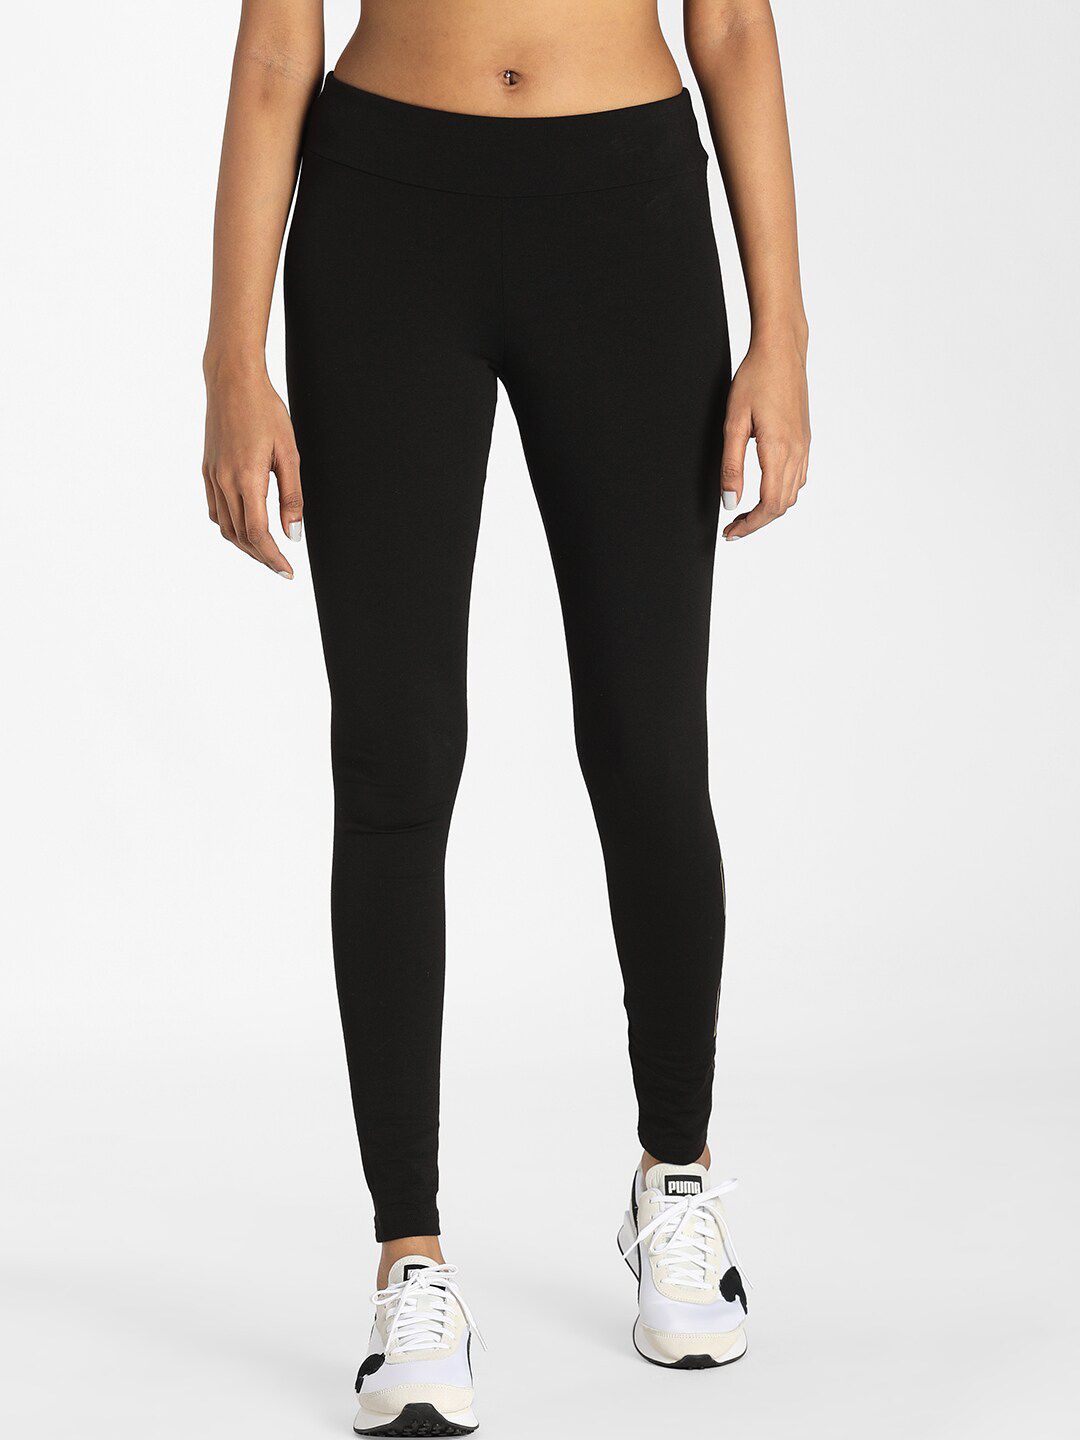 Puma Women Black & Gold Brand Logo Print Holiday Tight Fit Tights Price in India